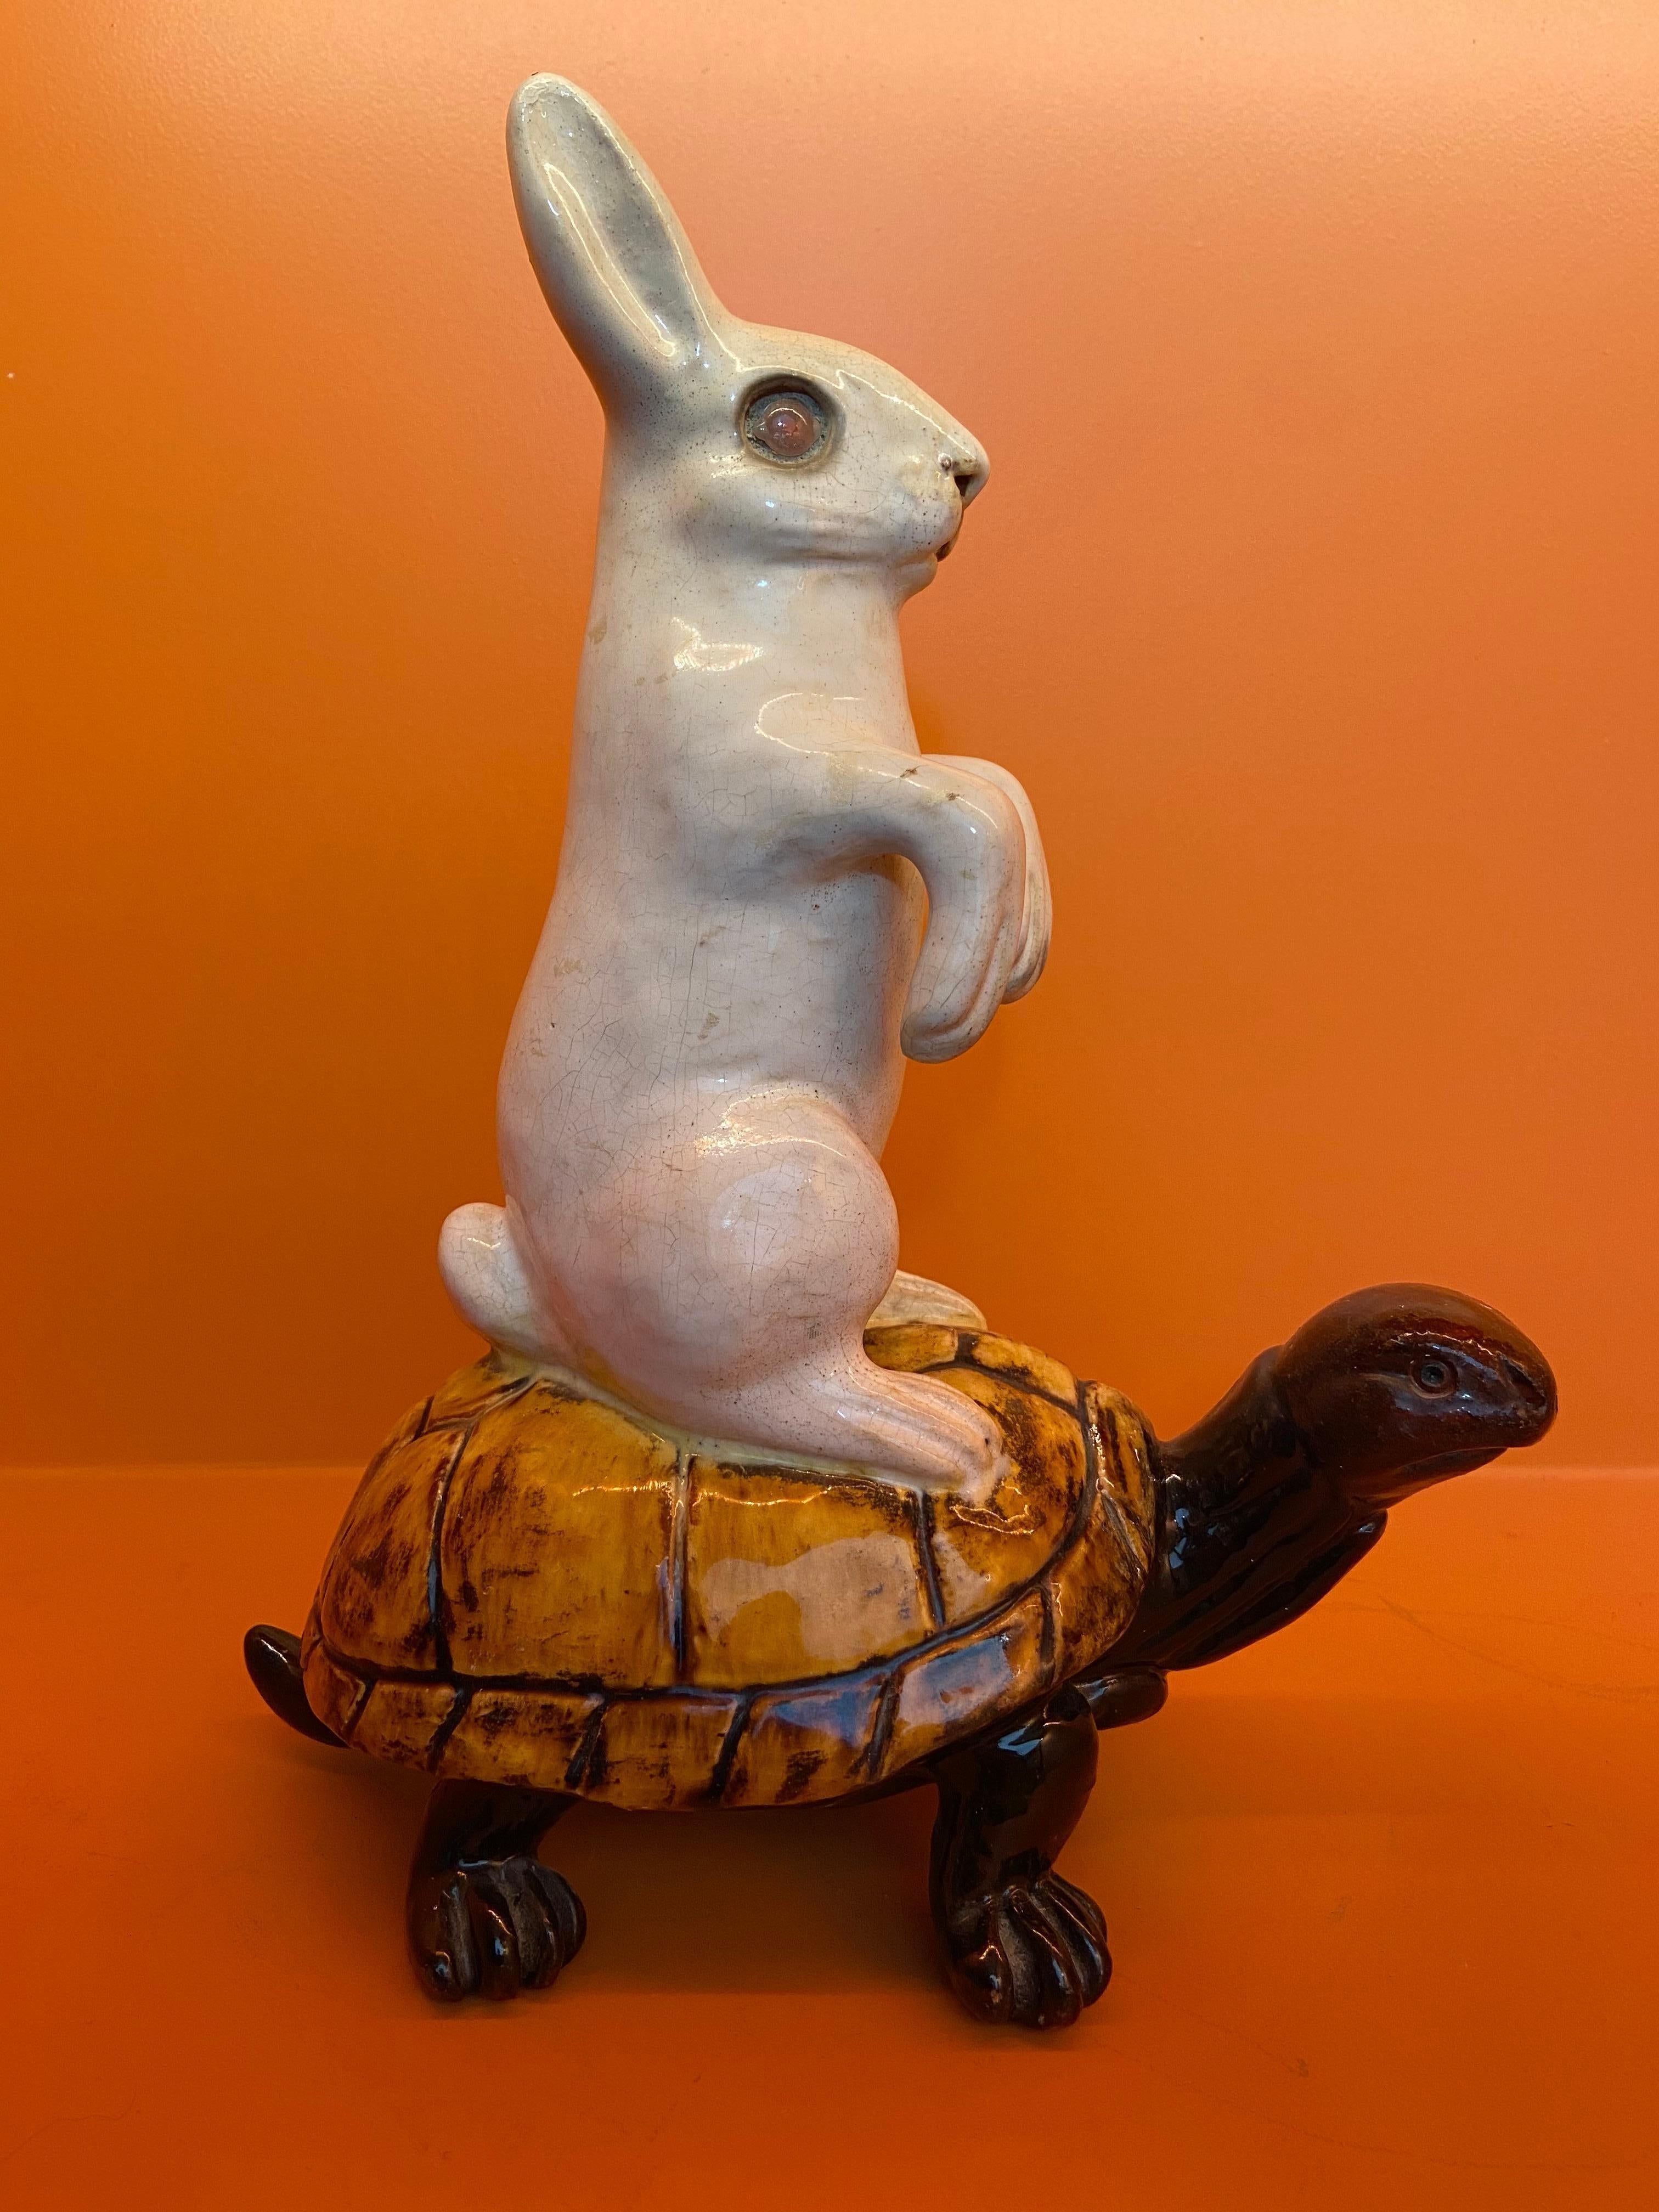 This earthenware is showing a rabbit on a turtle. This is a French work, attributed to famous designer and maker Emile Galle. Circa end of 19th century.